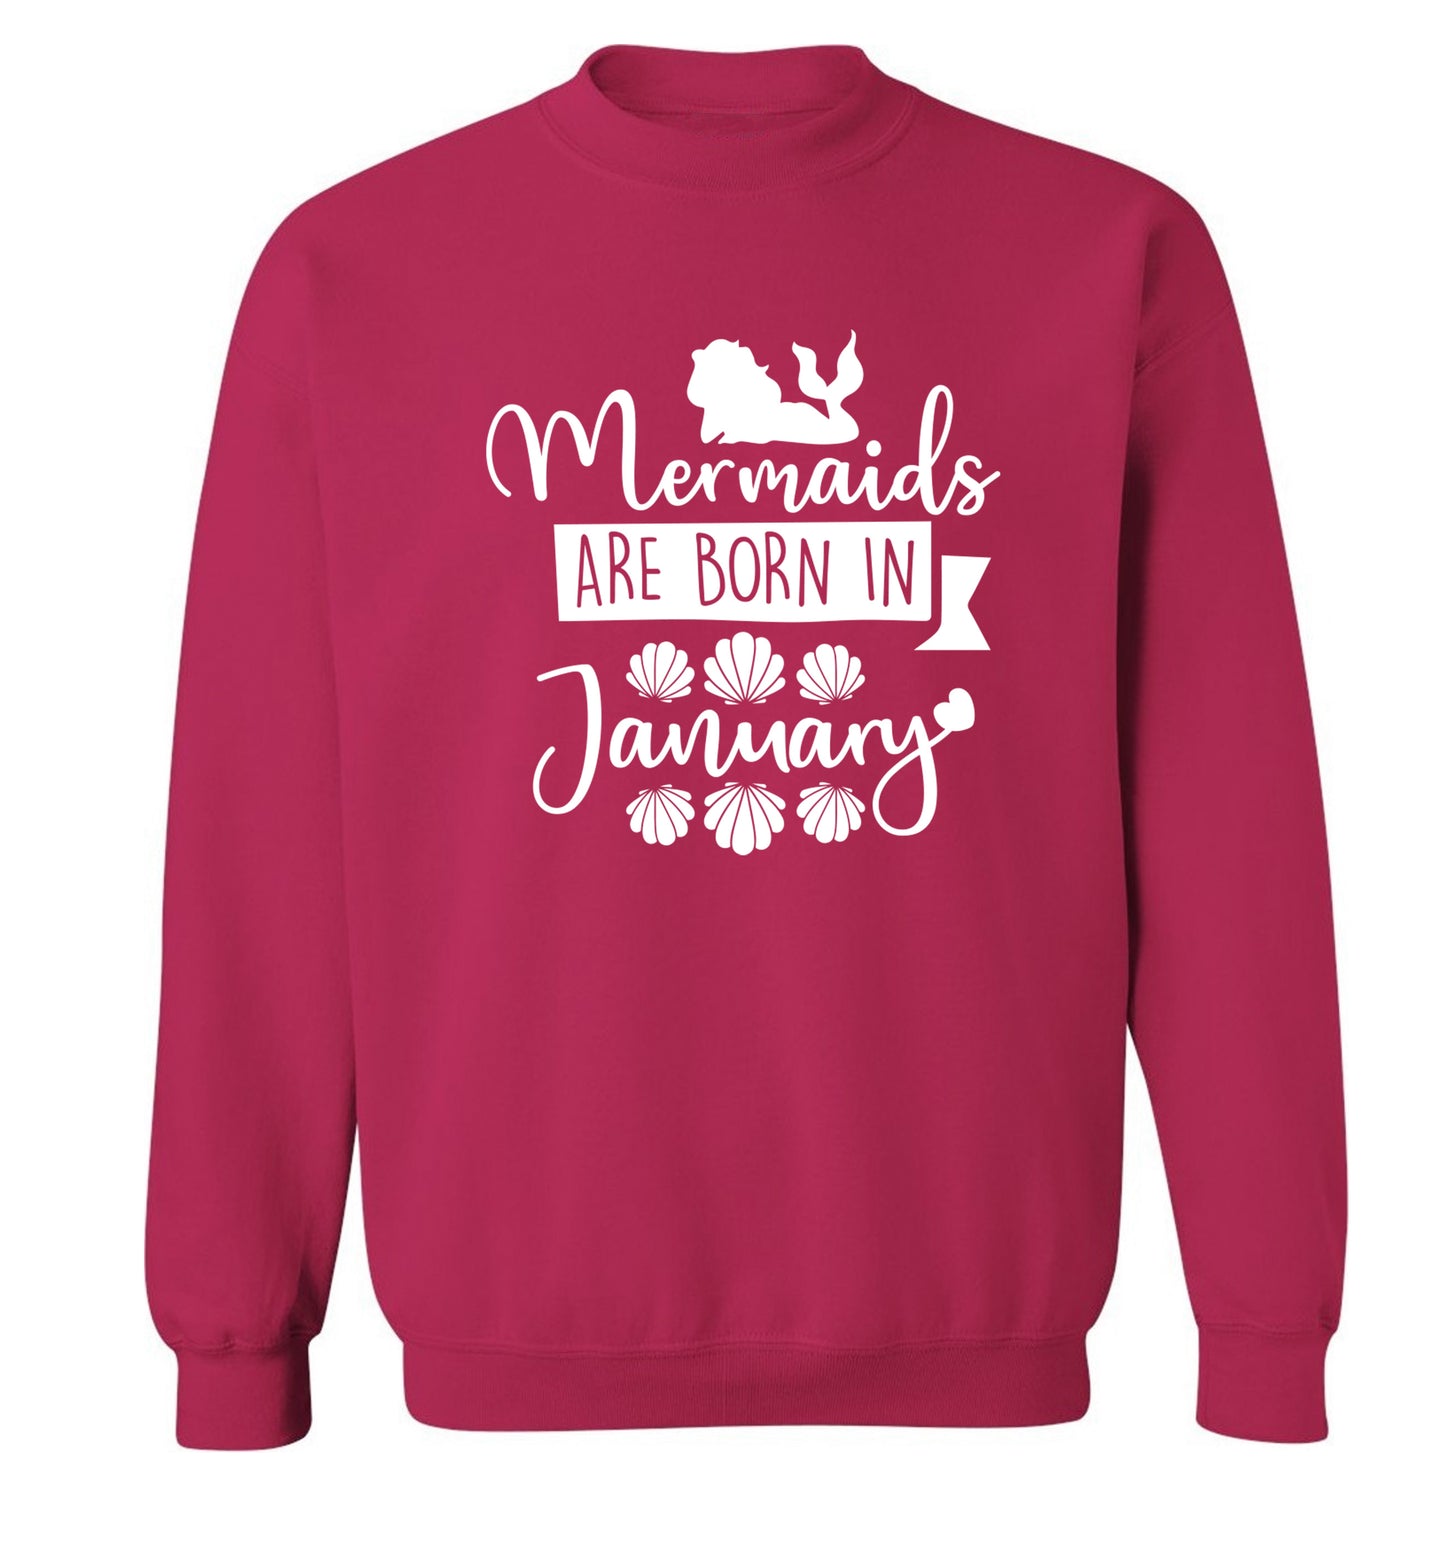 Mermaids are born in January Adult's unisex pink Sweater 2XL